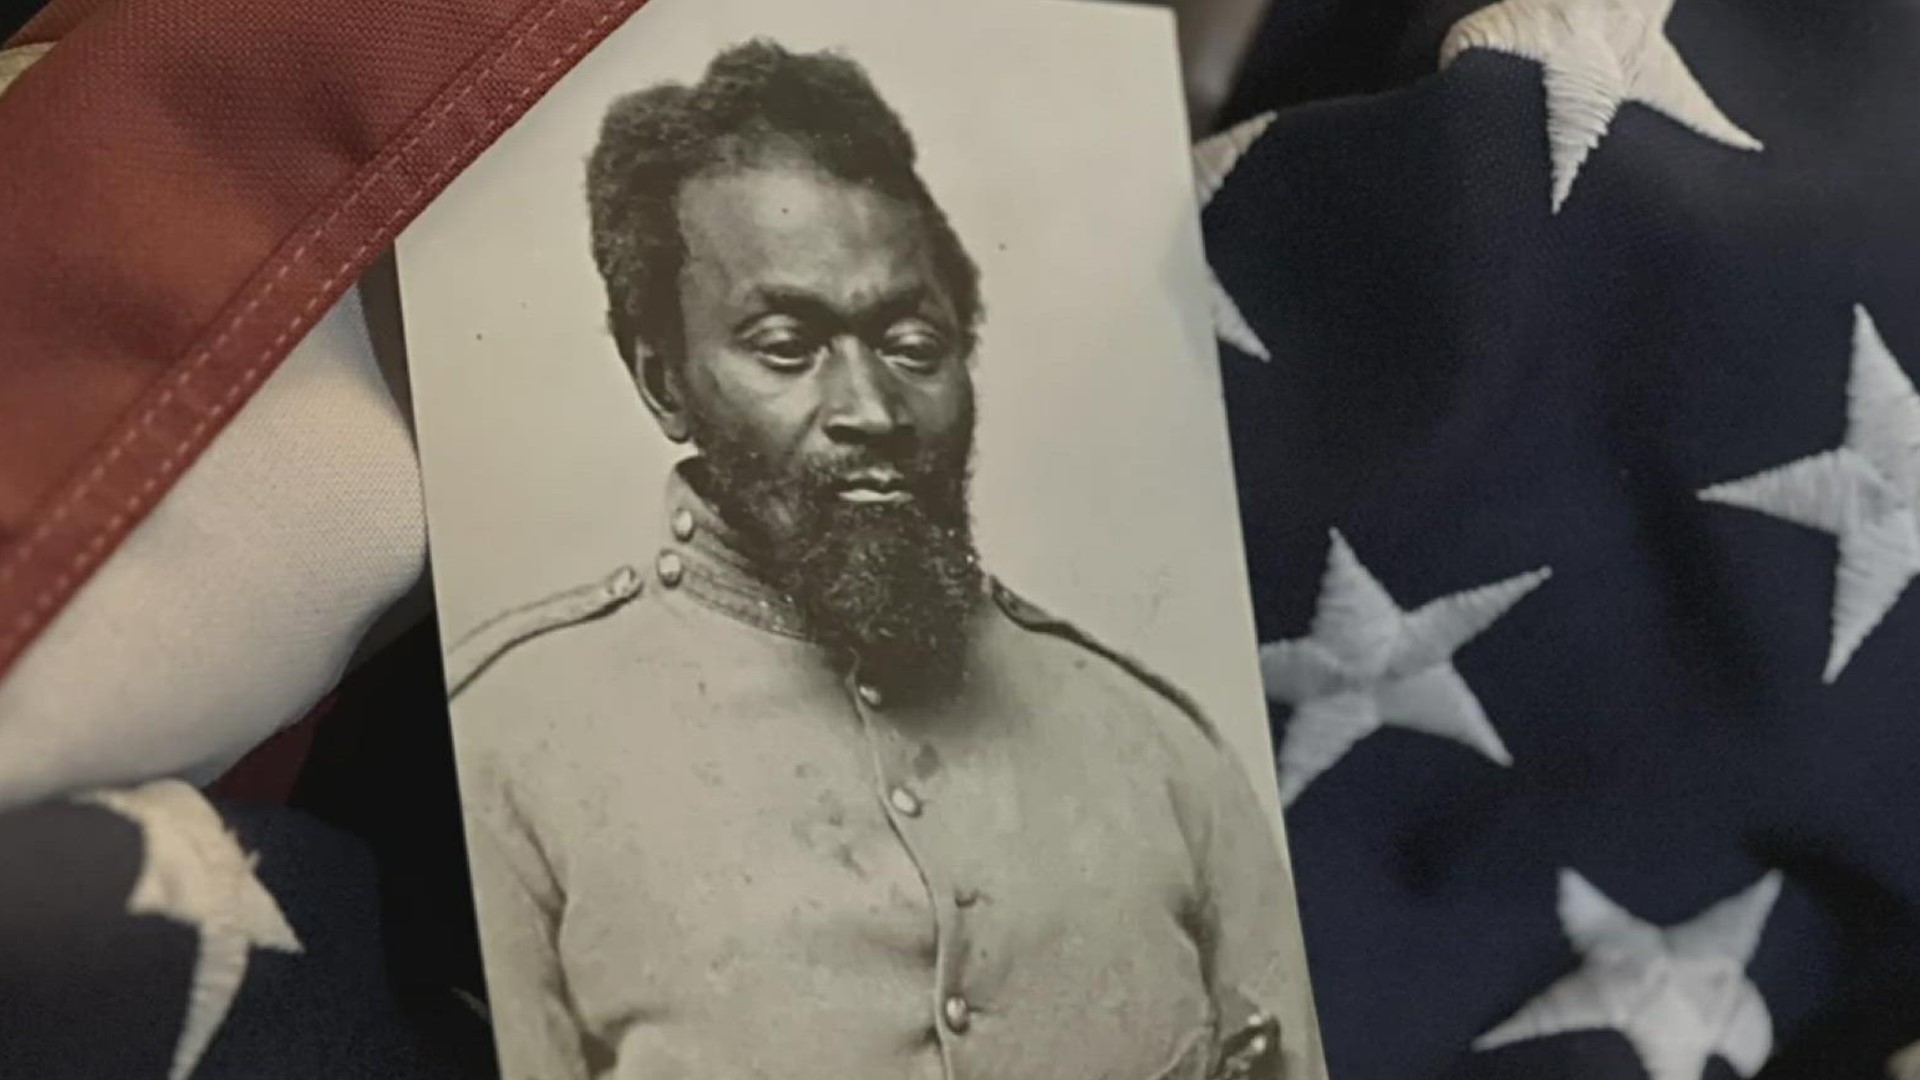 Schuylkill County historians are using Black History Month to tell the tale of Nick Biddle who made a lasting impact with his contributions during the Civil War.